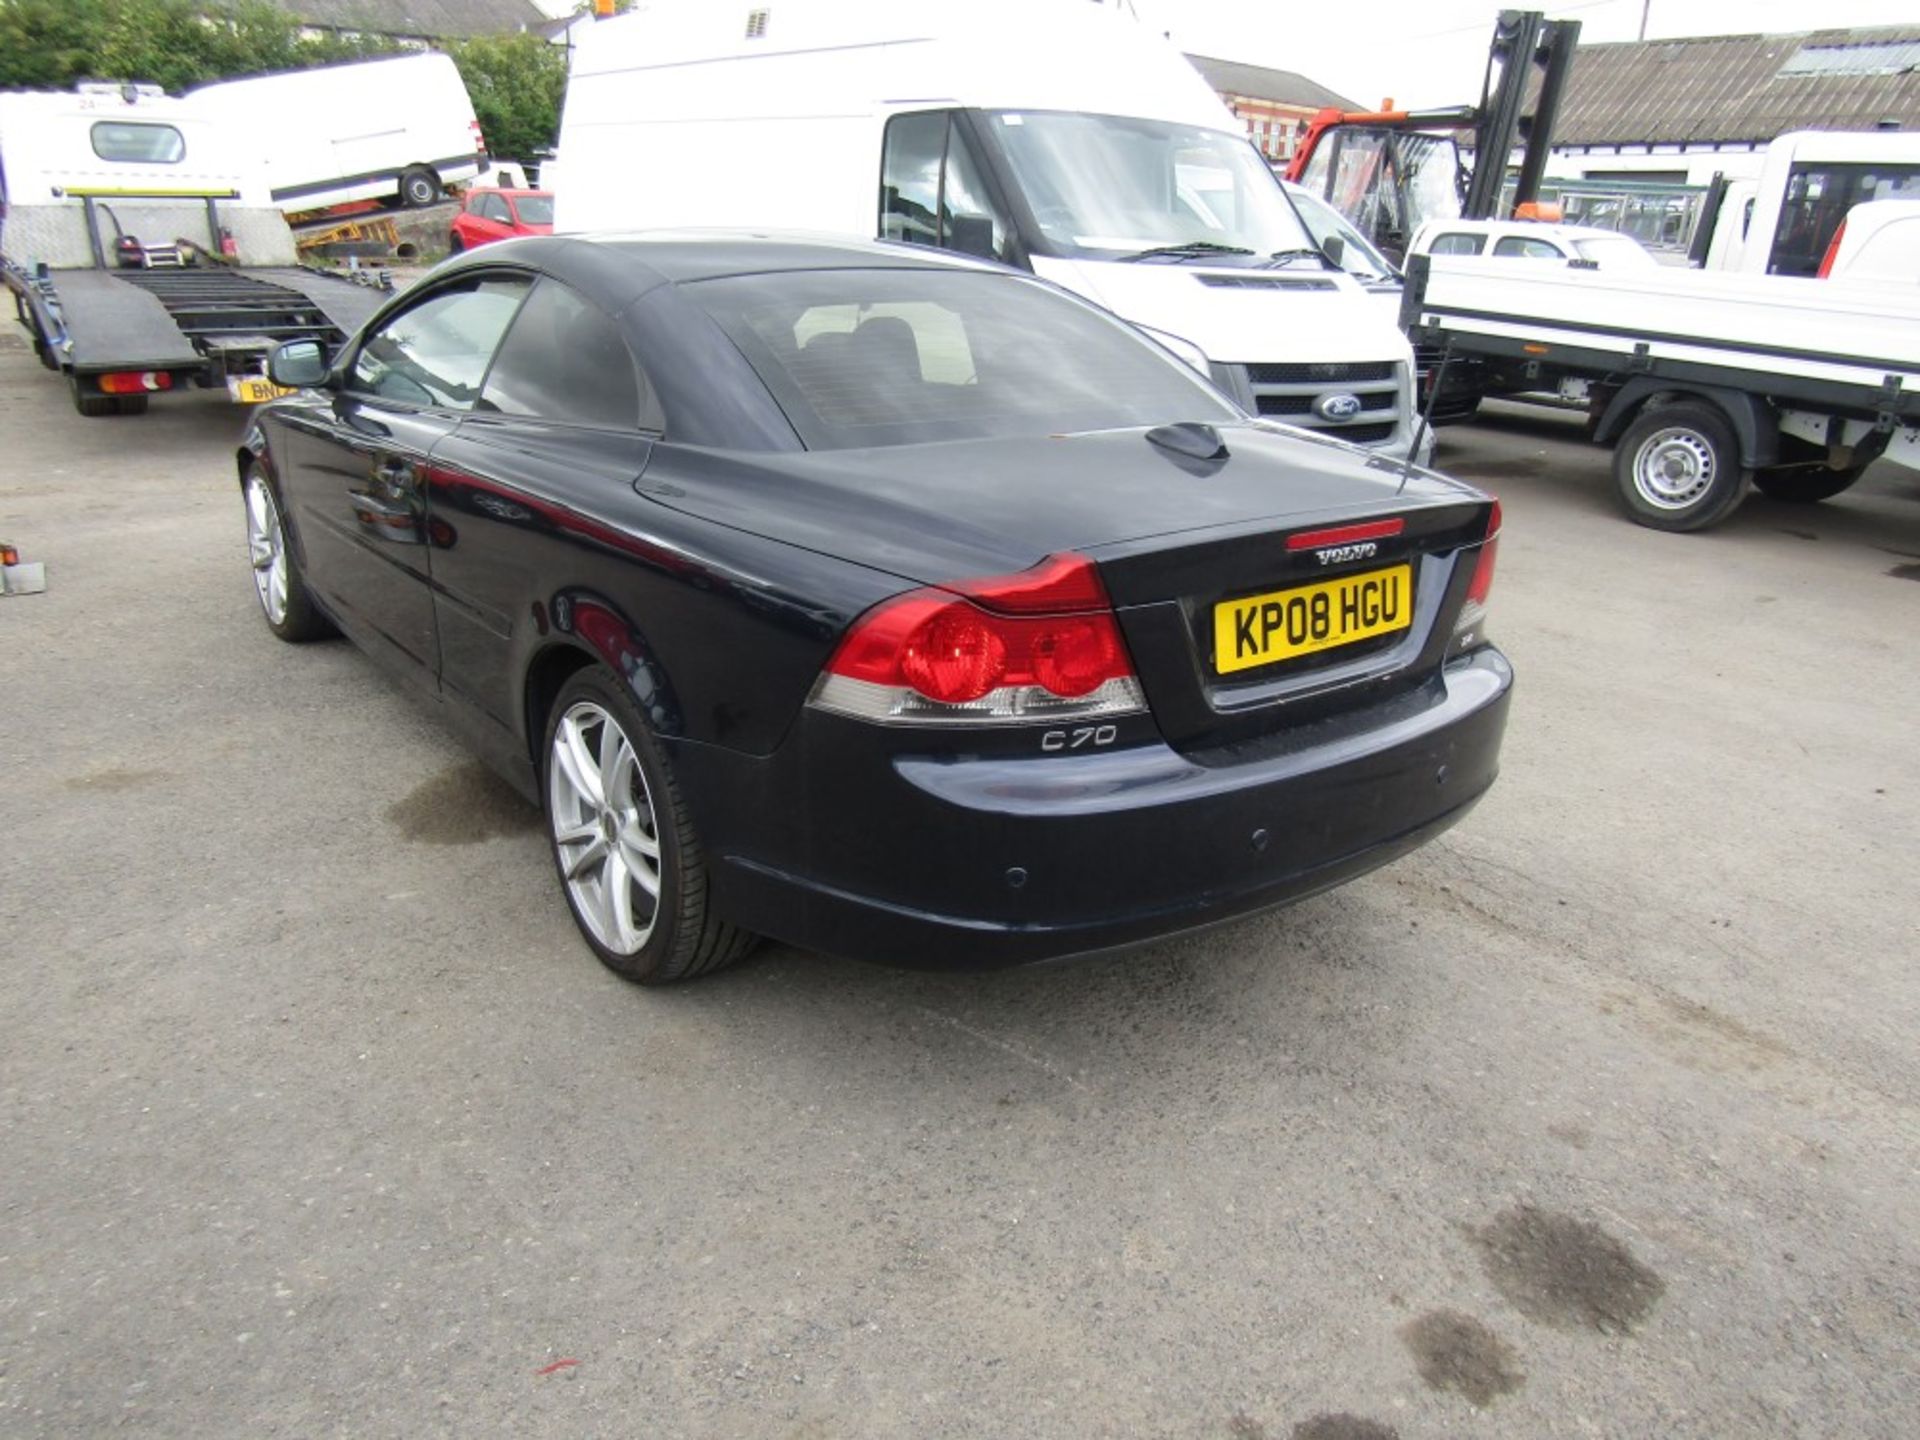 08 reg VOLVO C70 SE LUX AUTO CONVERTIBLE, 1ST REG 04/08, TEST 05/23, 175809M, V5 HERE, 6 FORMER - Image 3 of 6